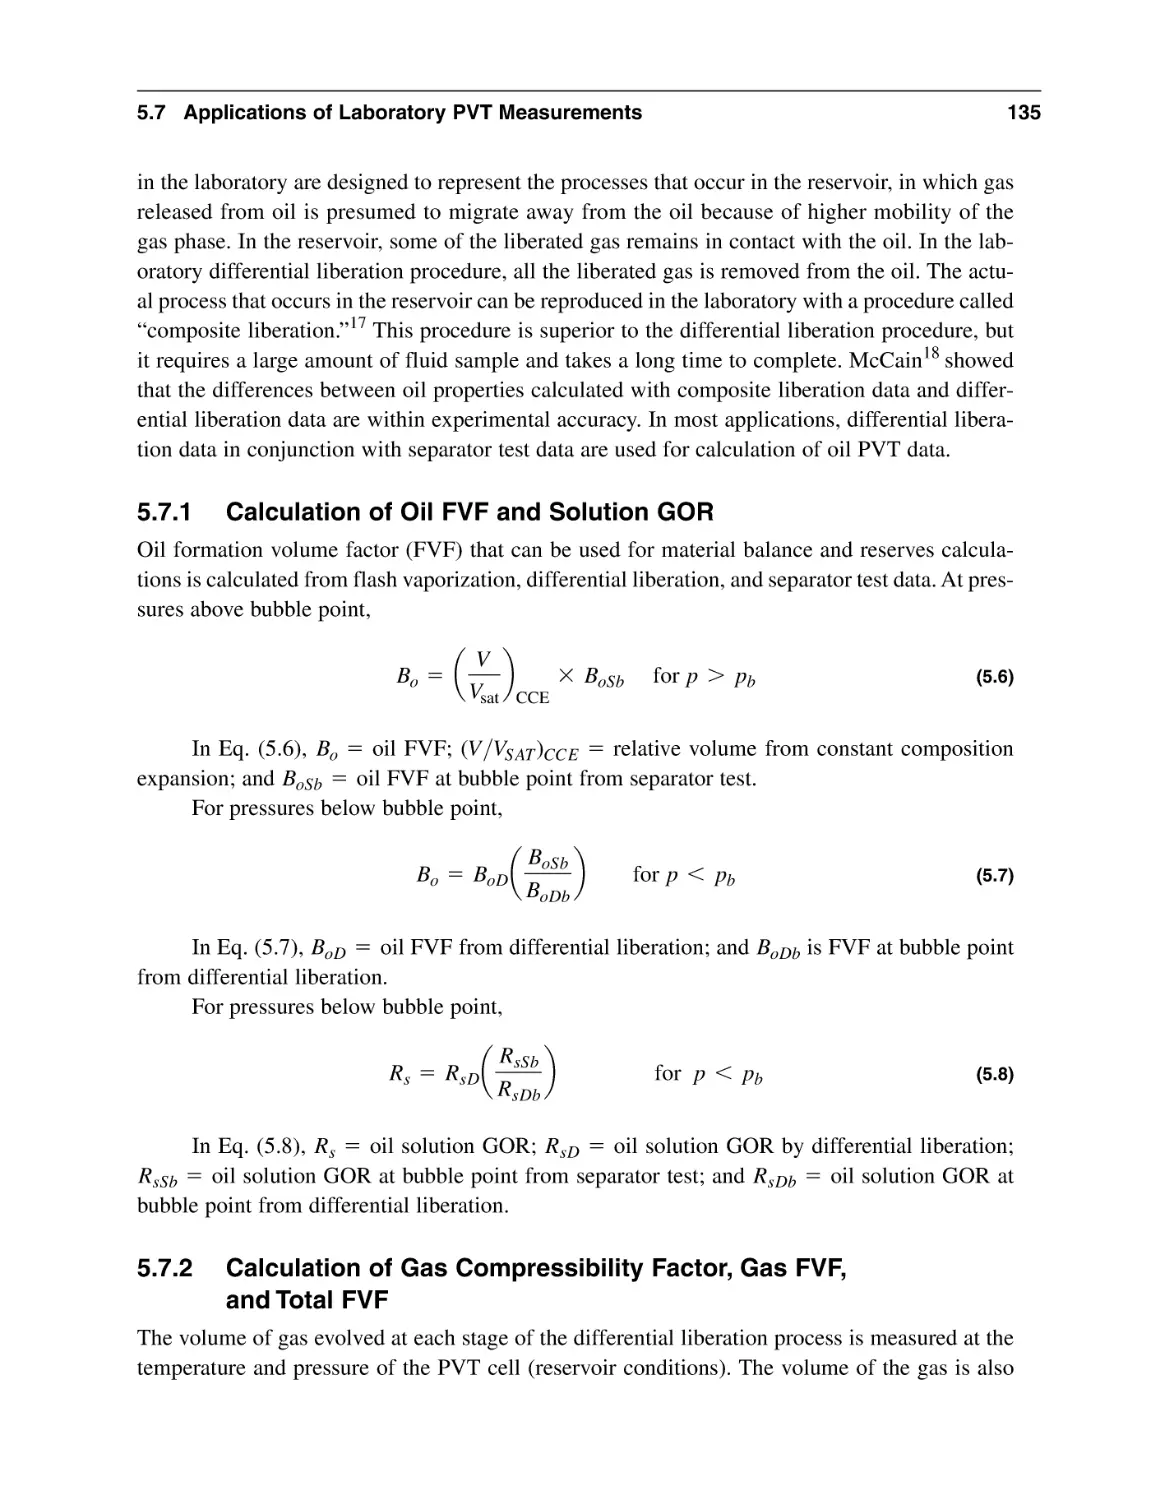 5.7.1 Calculation of Oil FVF and Solution GOR
5.7.2 Calculation of Gas Compressibility Factor, Gas FVF, and Total FVF